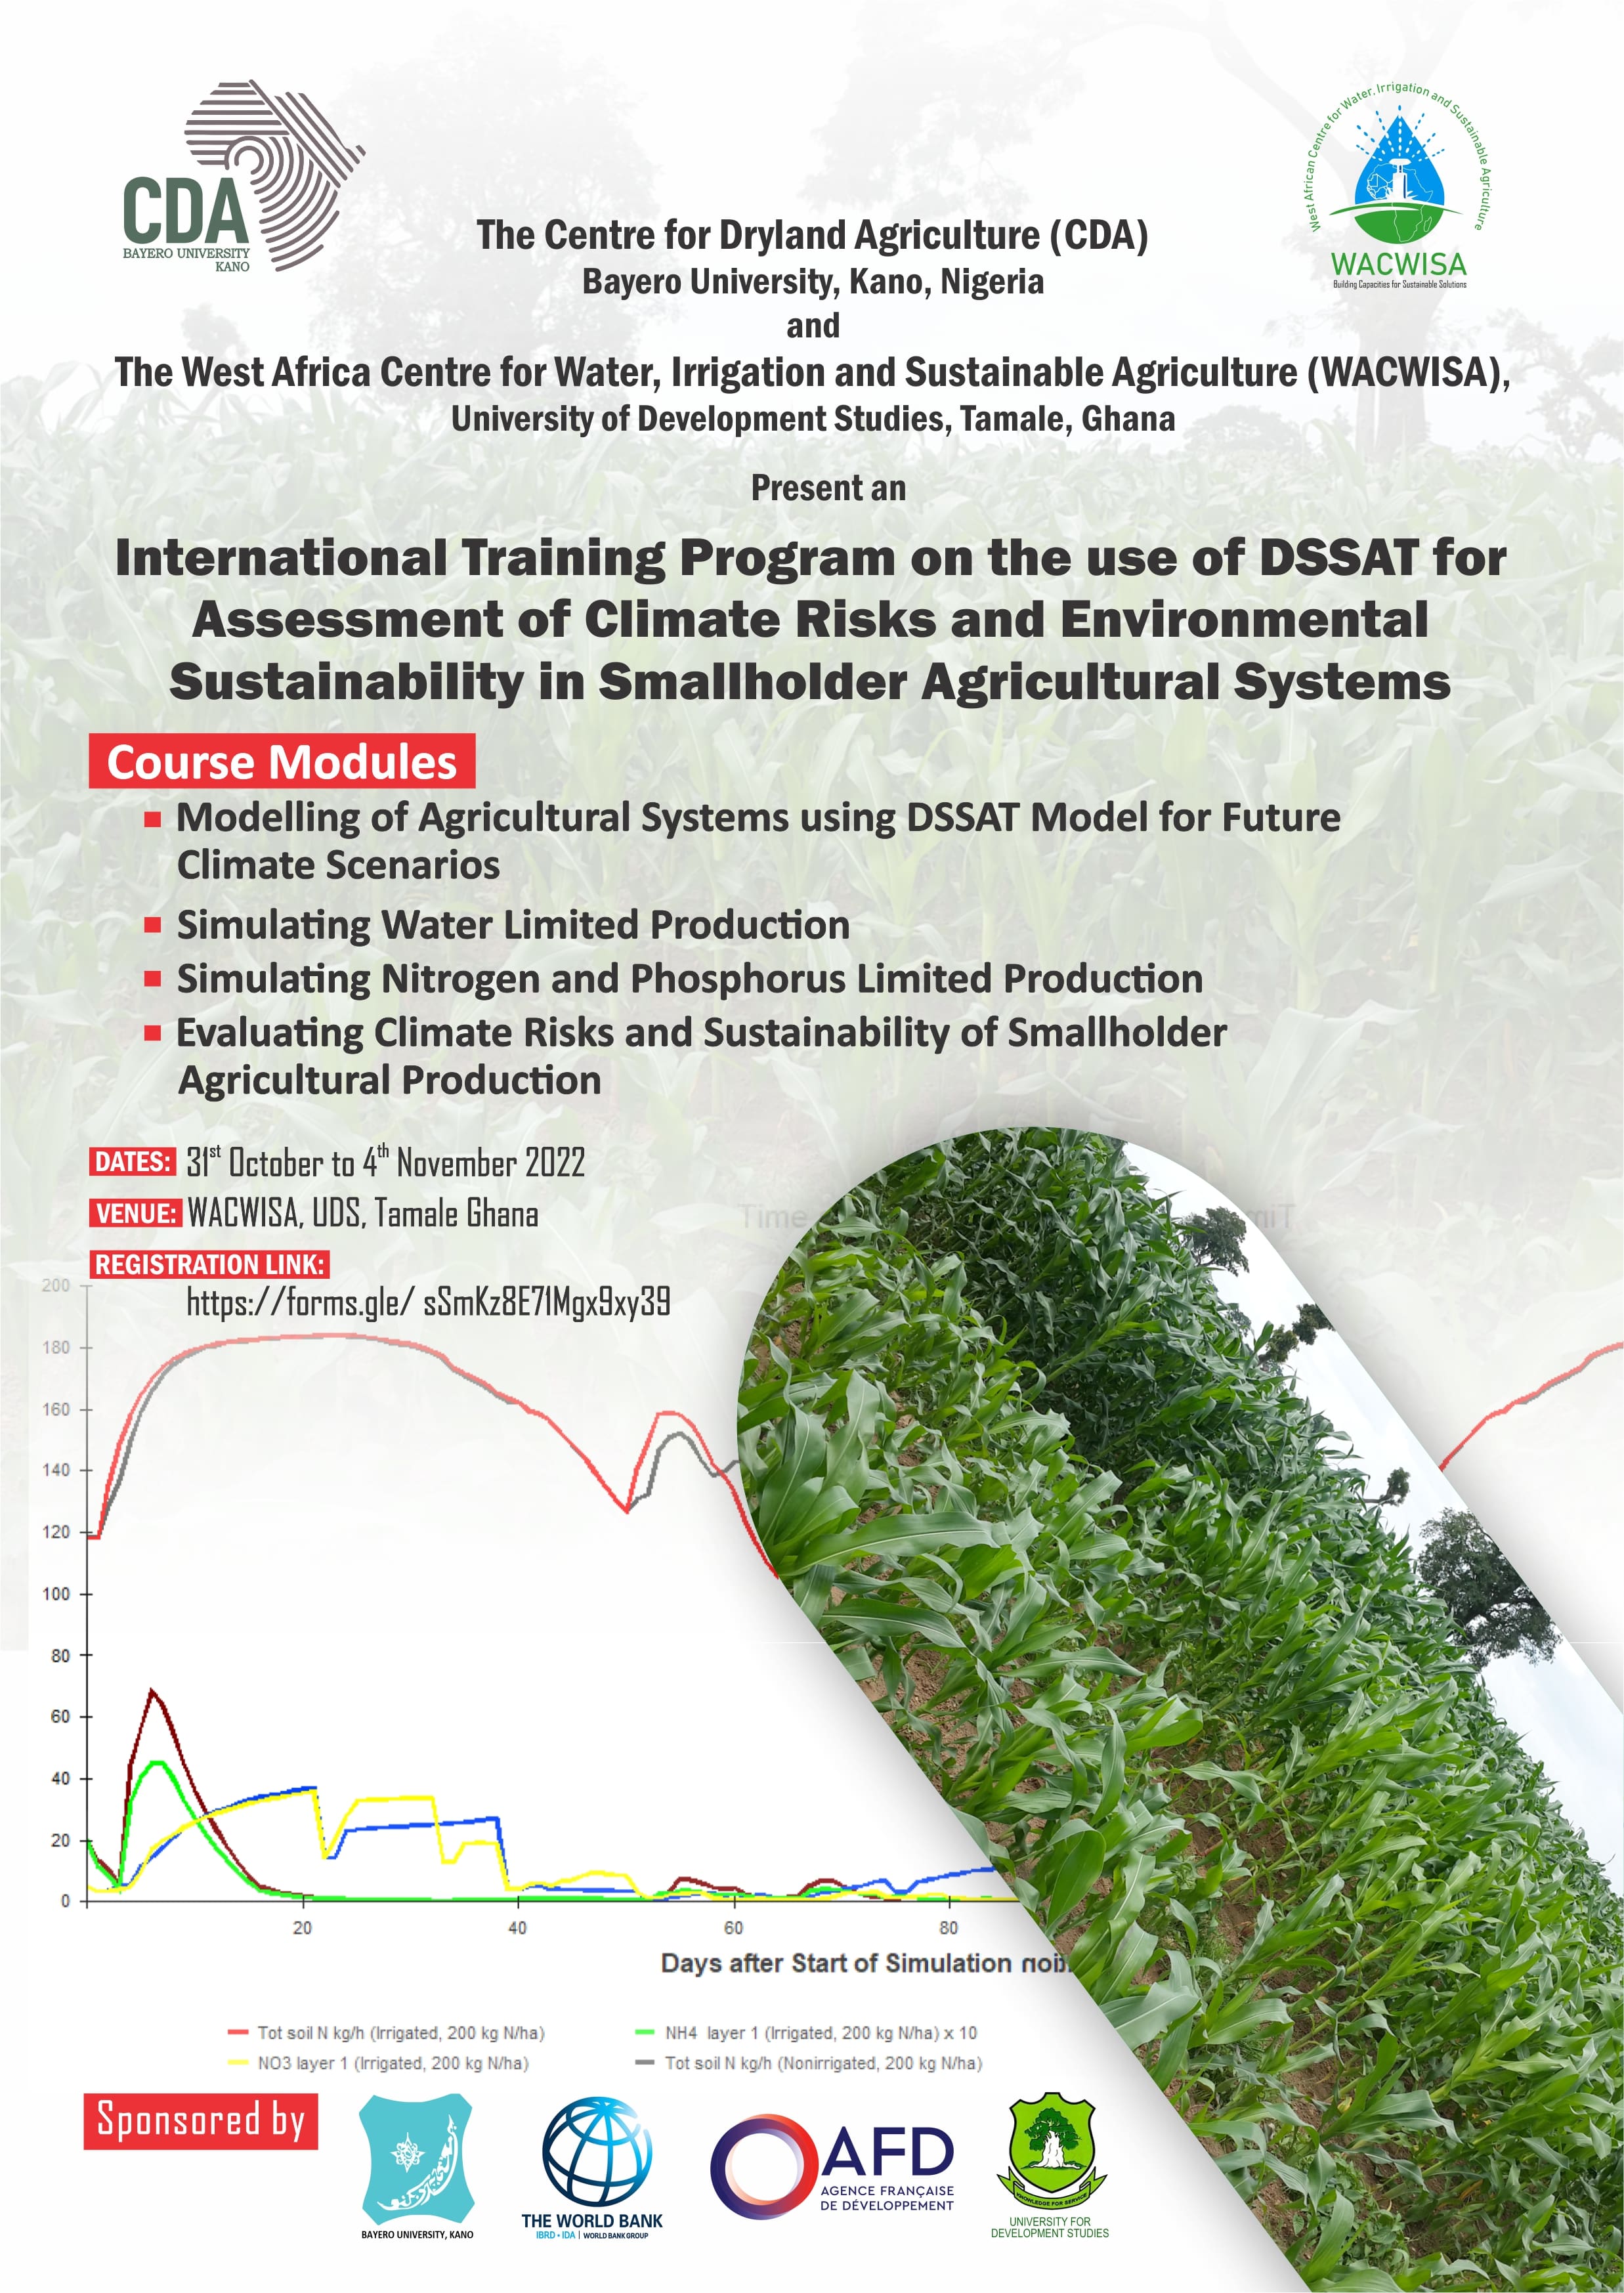 International Training Programme on the use of DSSAT for Assessment of Climate Risks and Environmental Sustainability in Smallholder Agriculture Systems